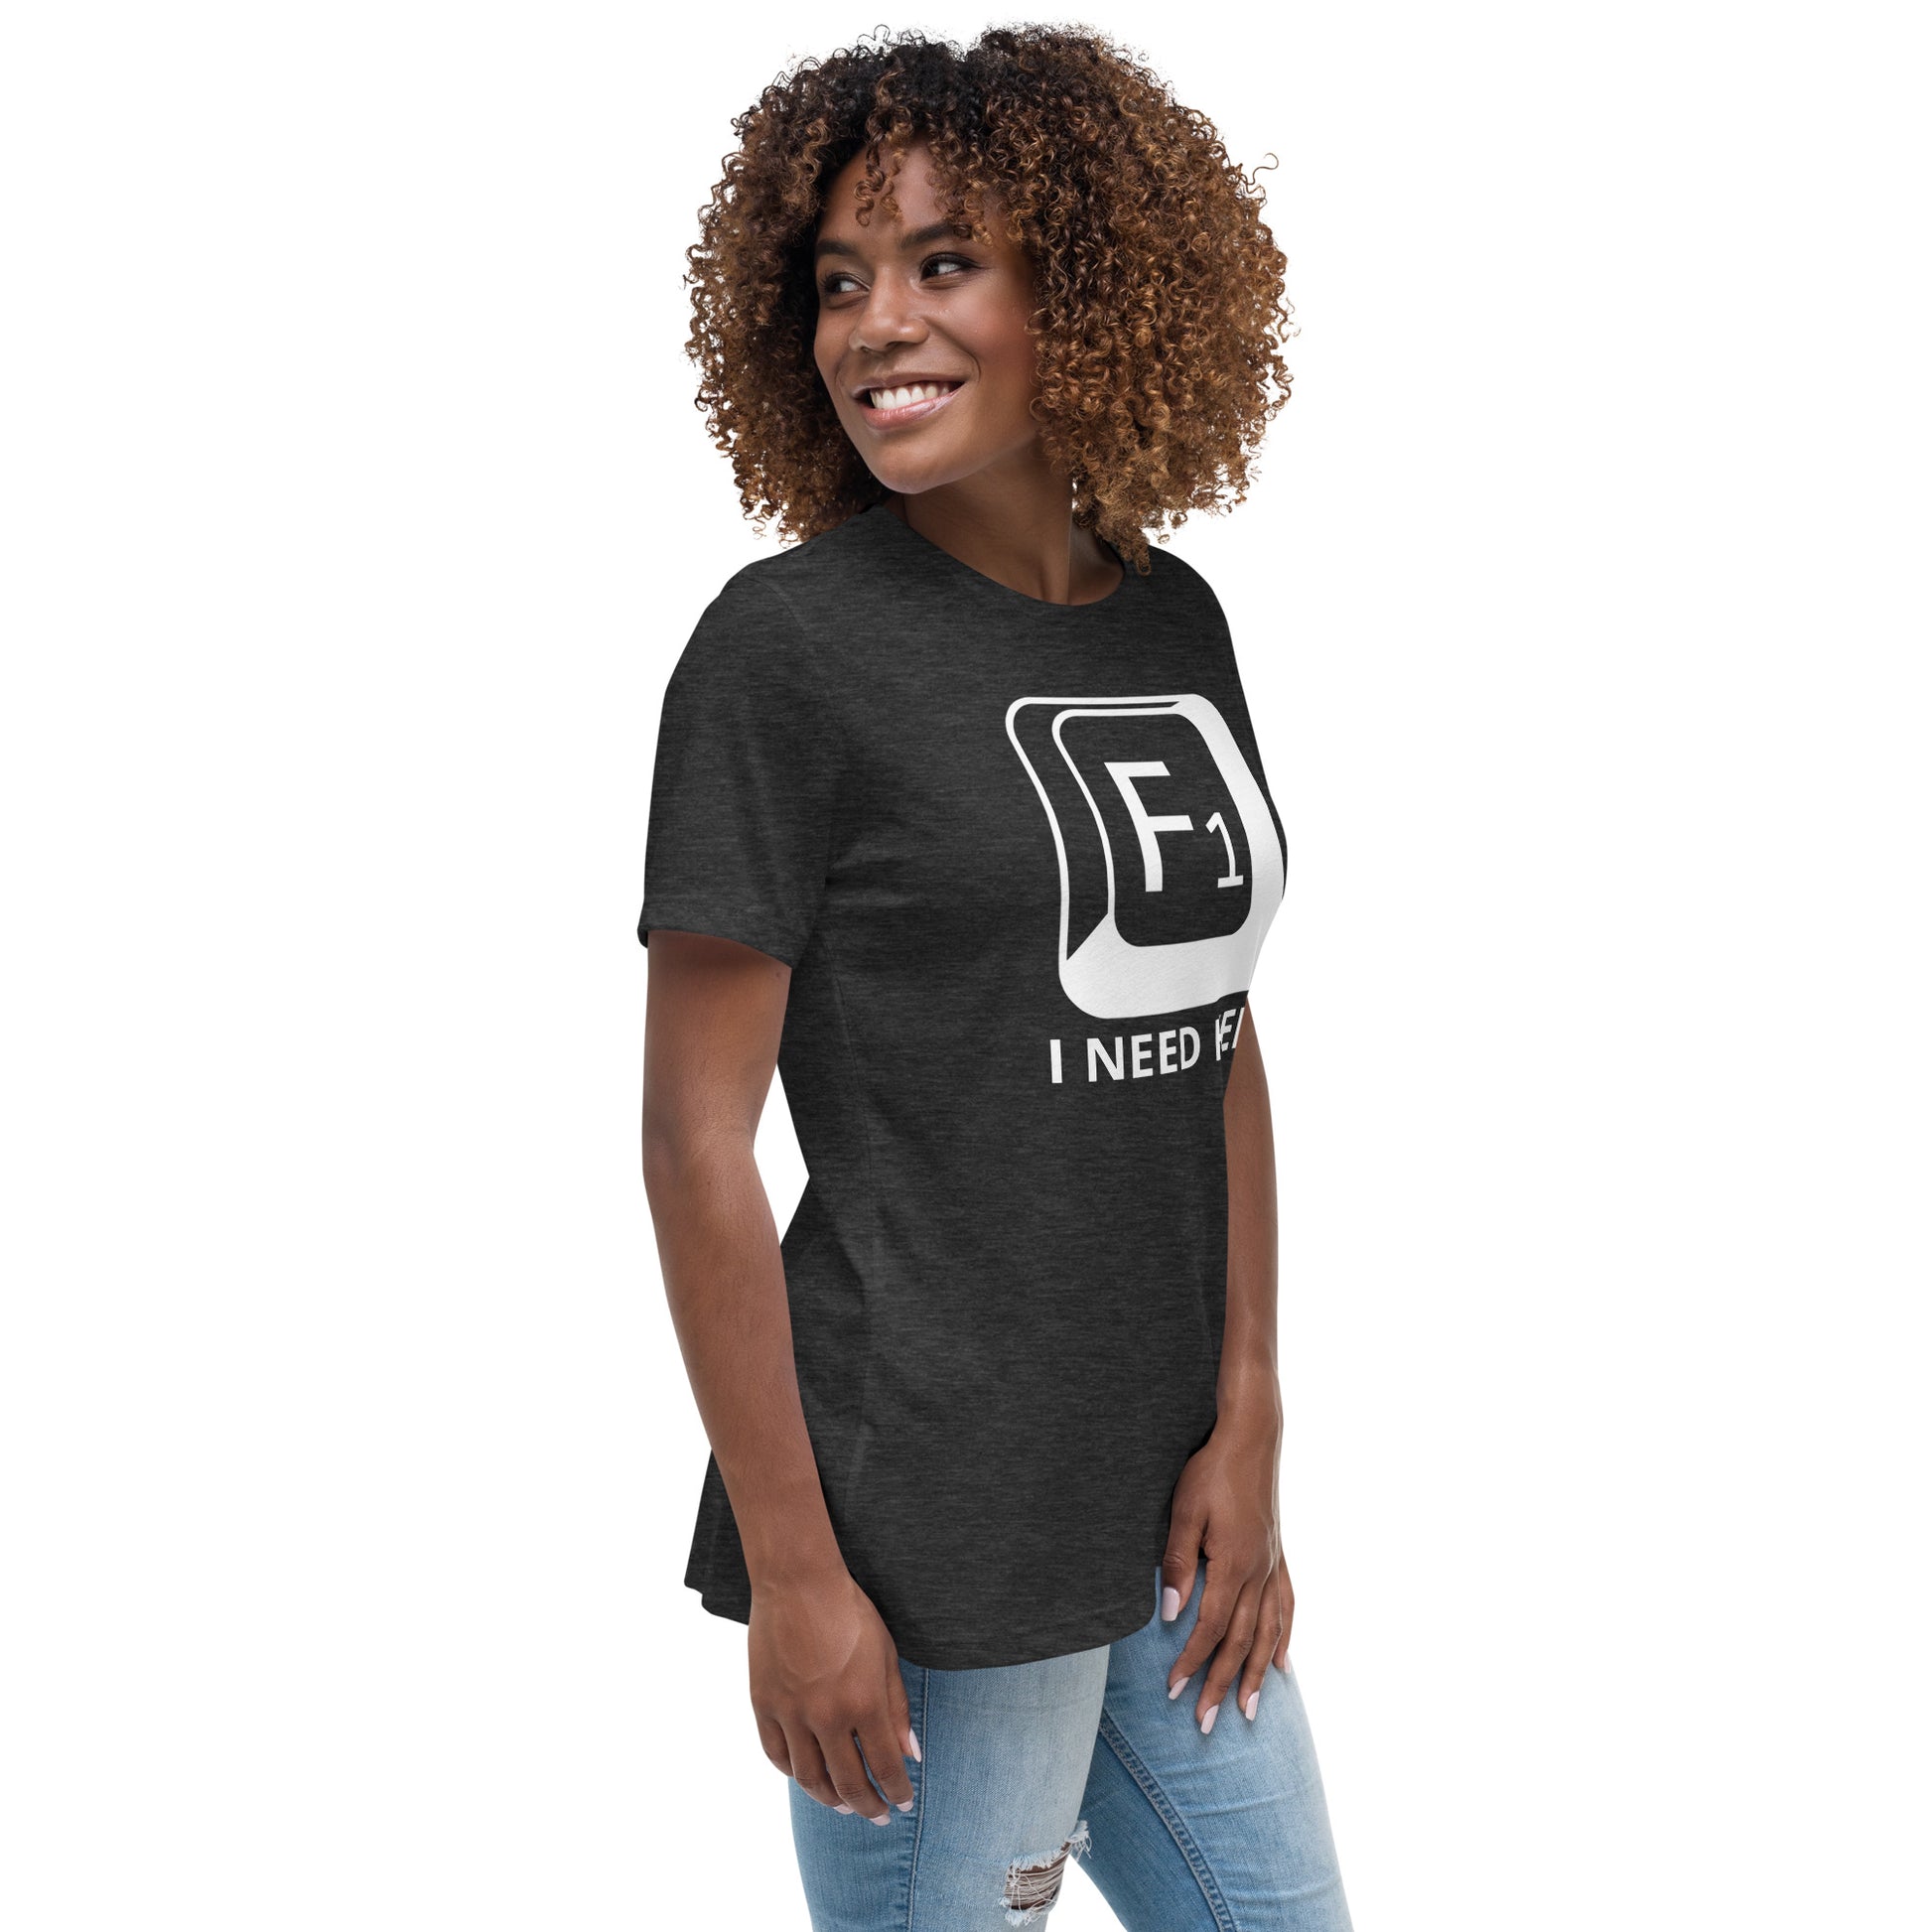 Woman with dark grey t-shirt with picture of "F1" key and text "I need help"